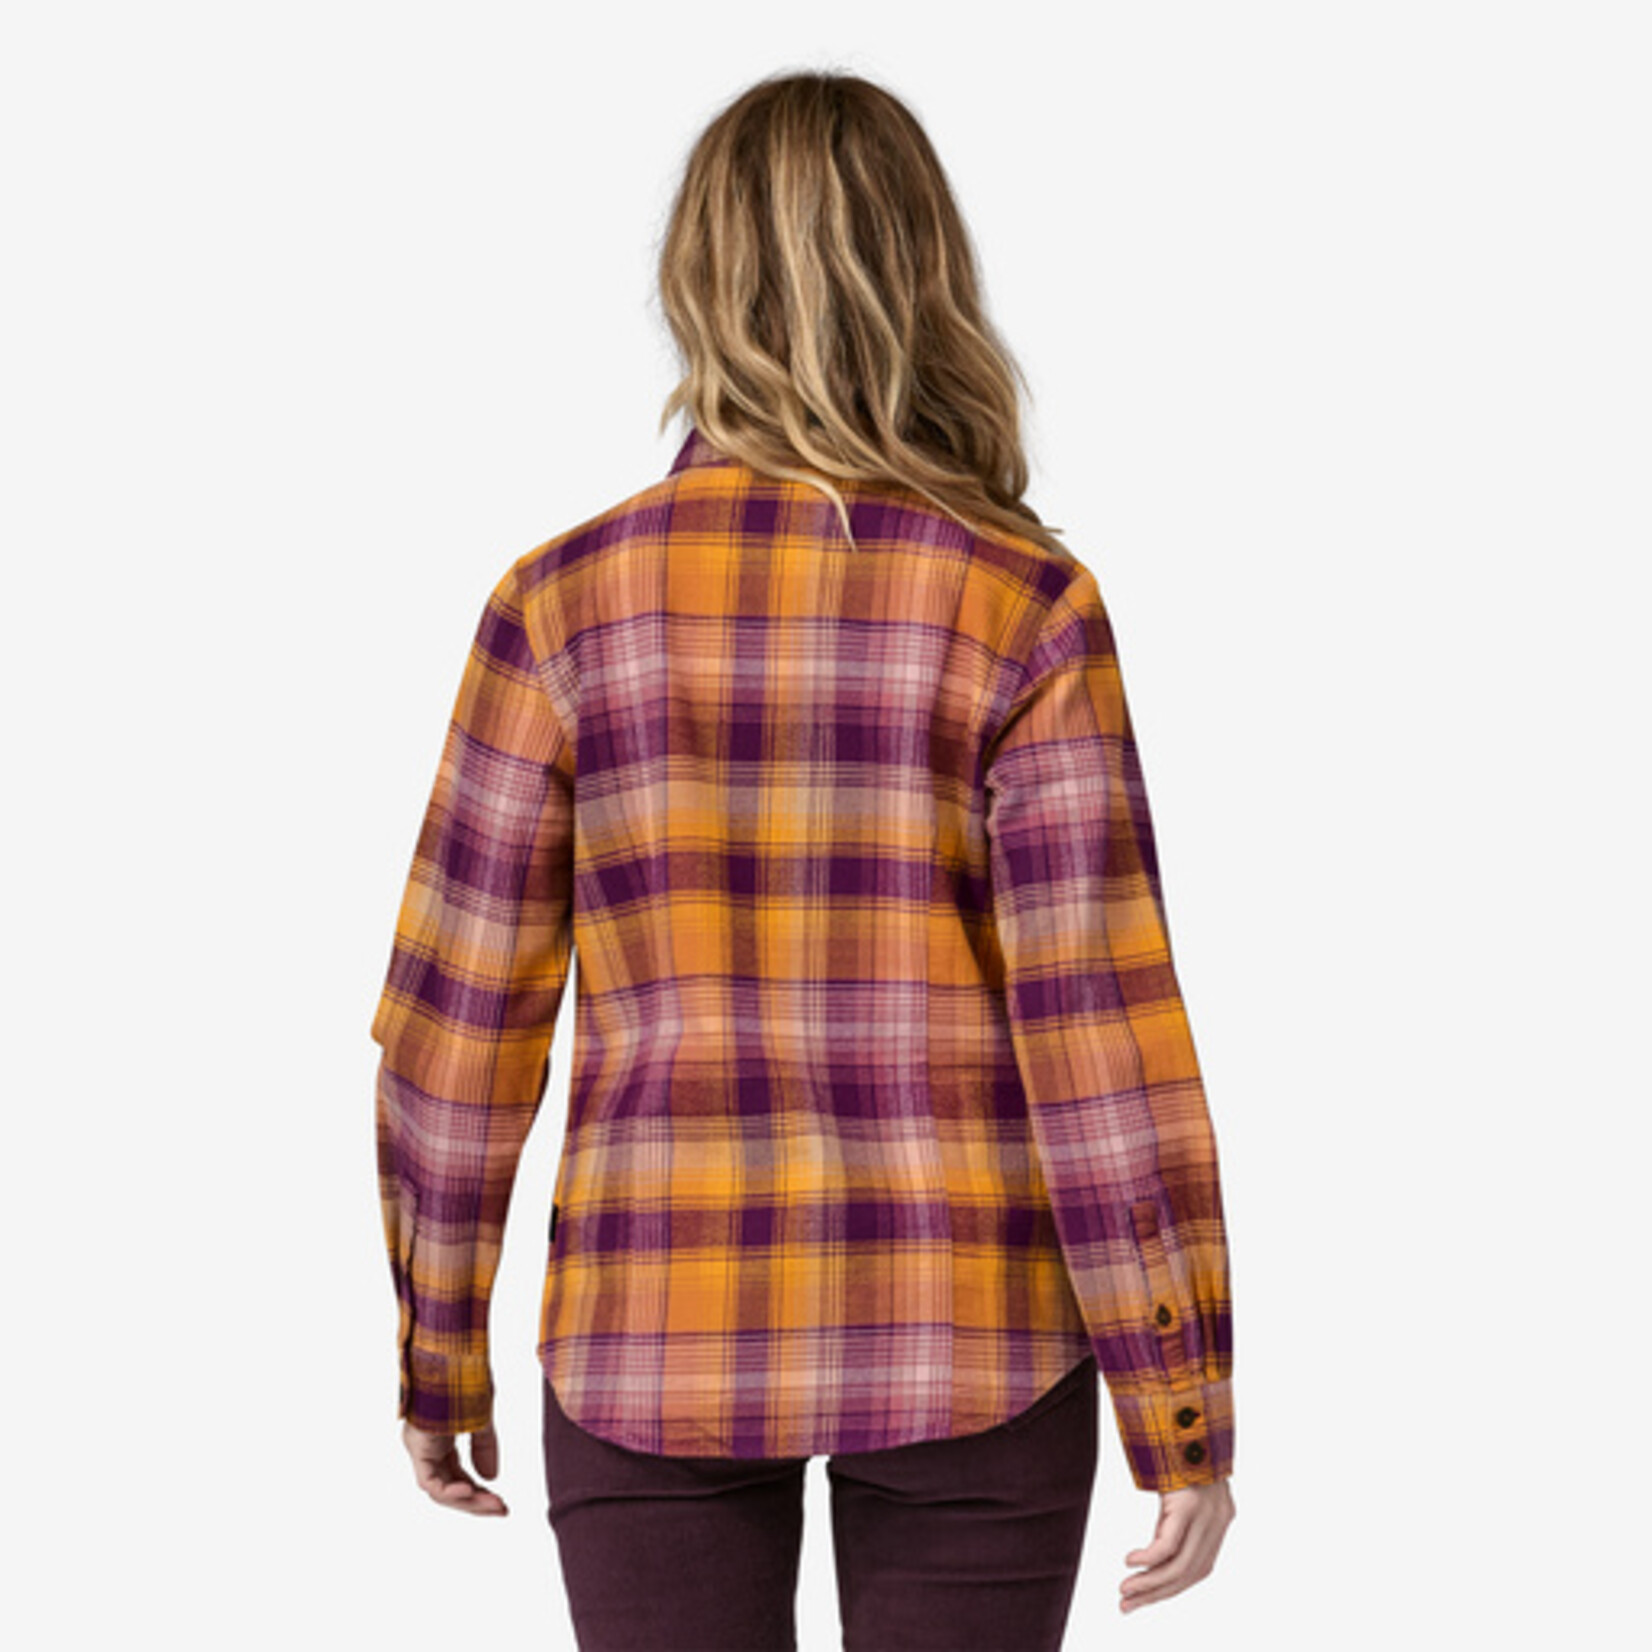 Patagonia Women's Long-Sleeved Organic Cotton Midweight Fjord Flannel Shirt